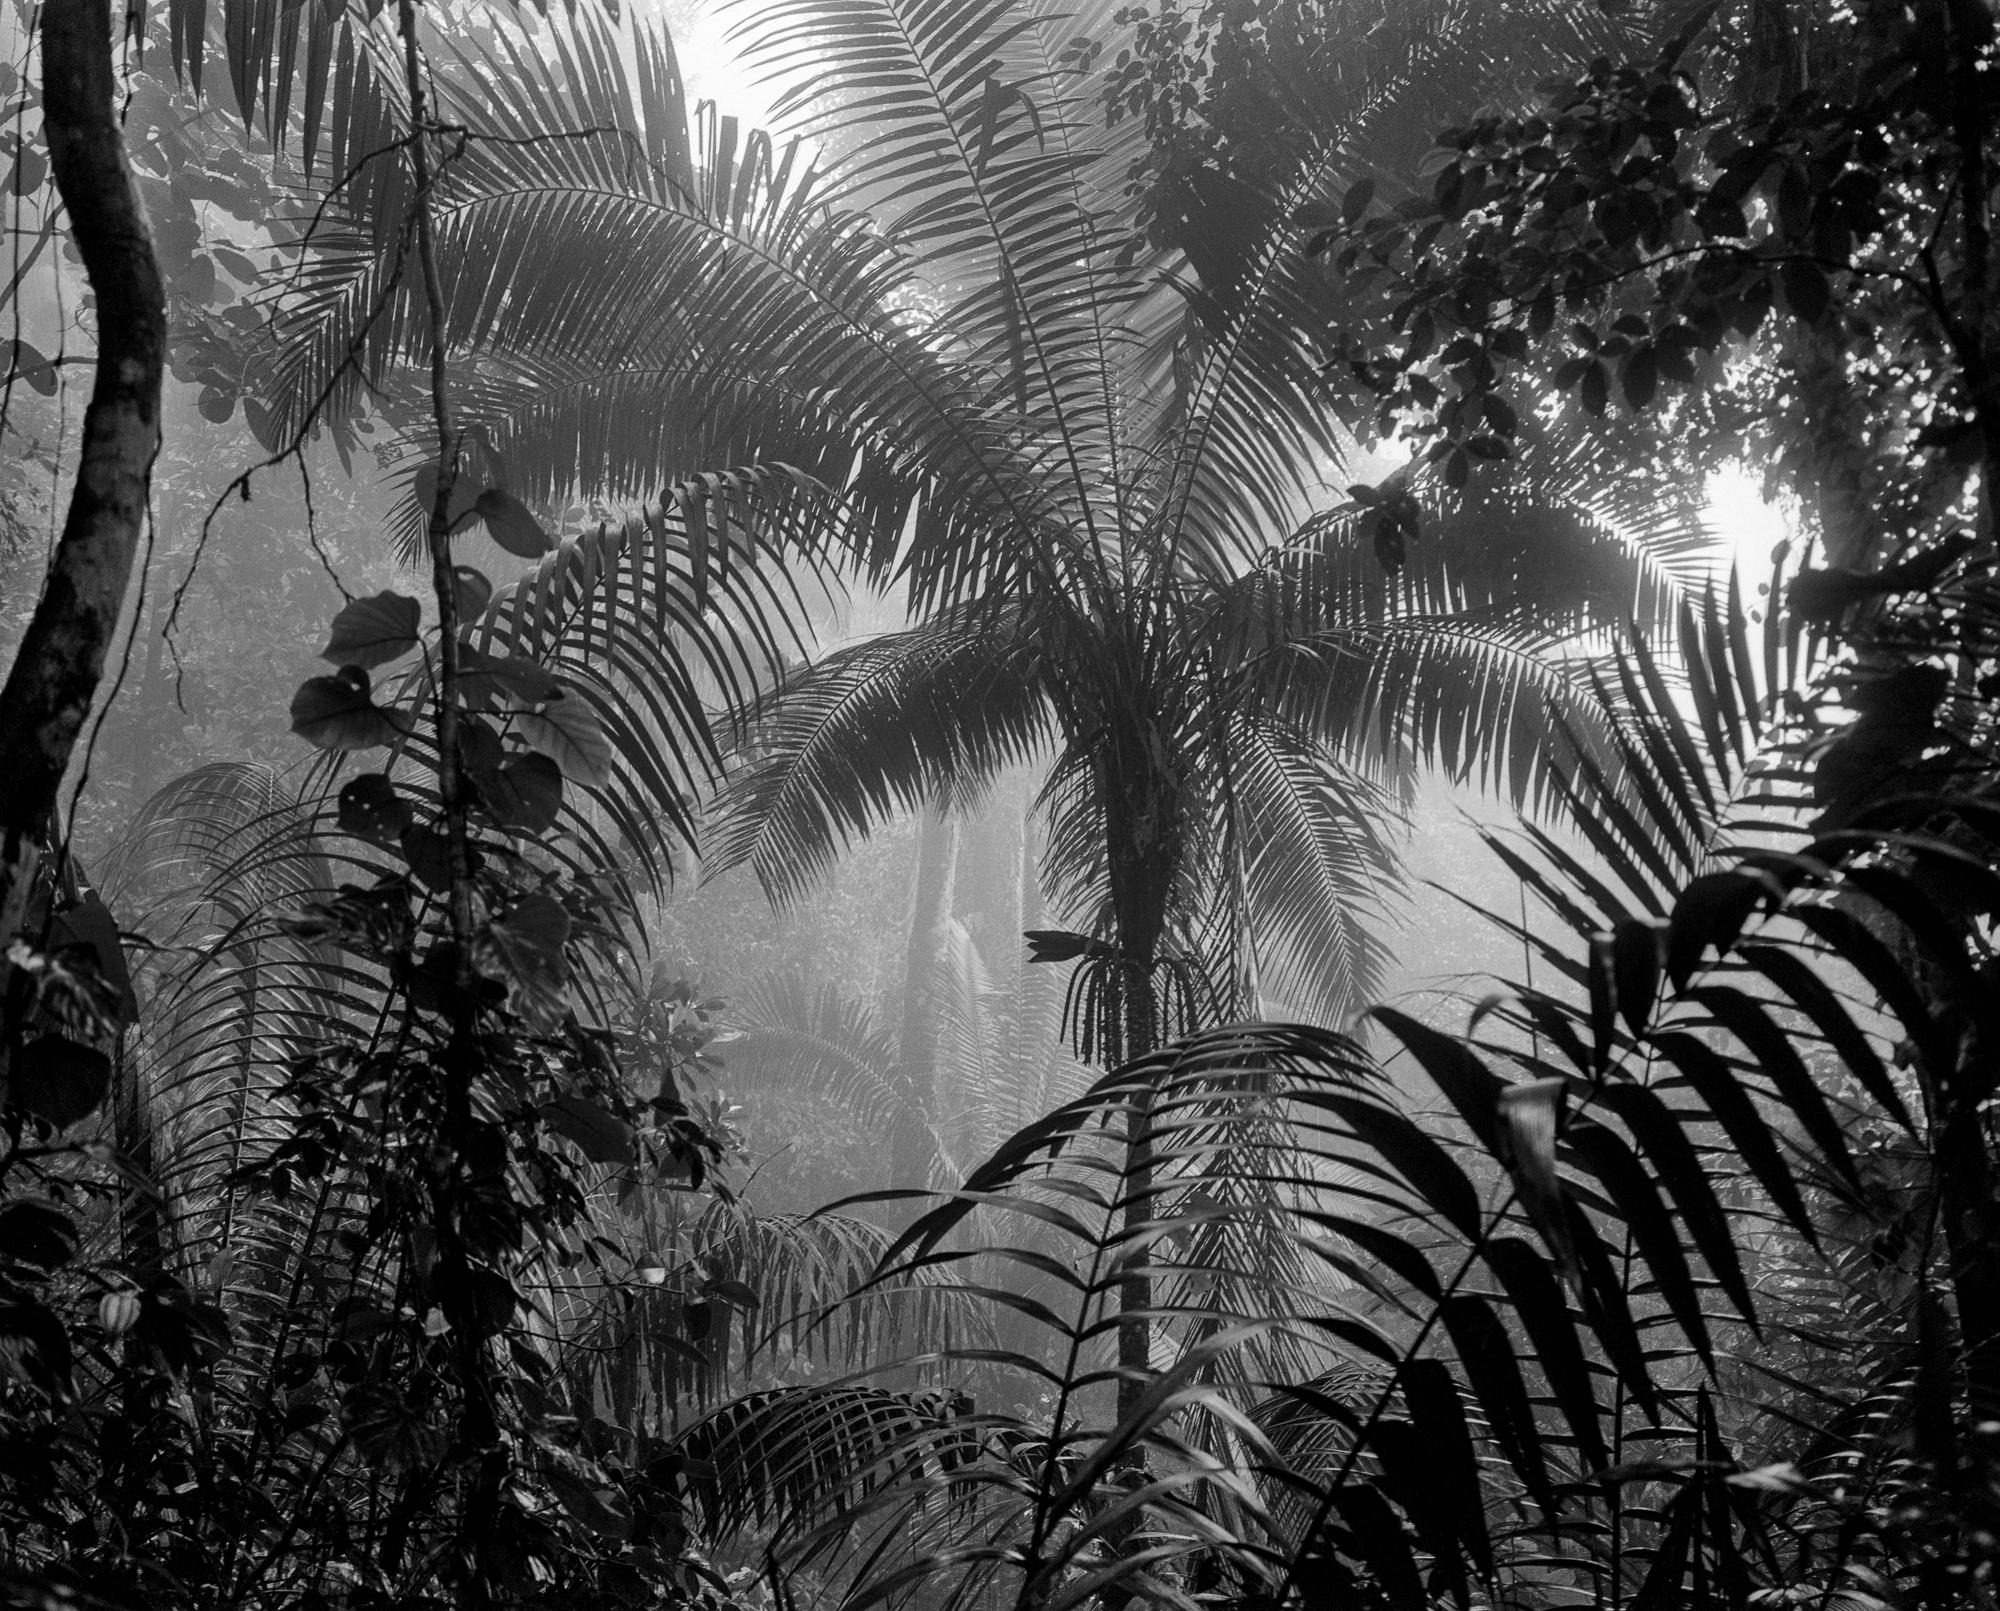 Bosque Húmedo Tropical II Nuqui, From the Series Bosques. B&W Photography